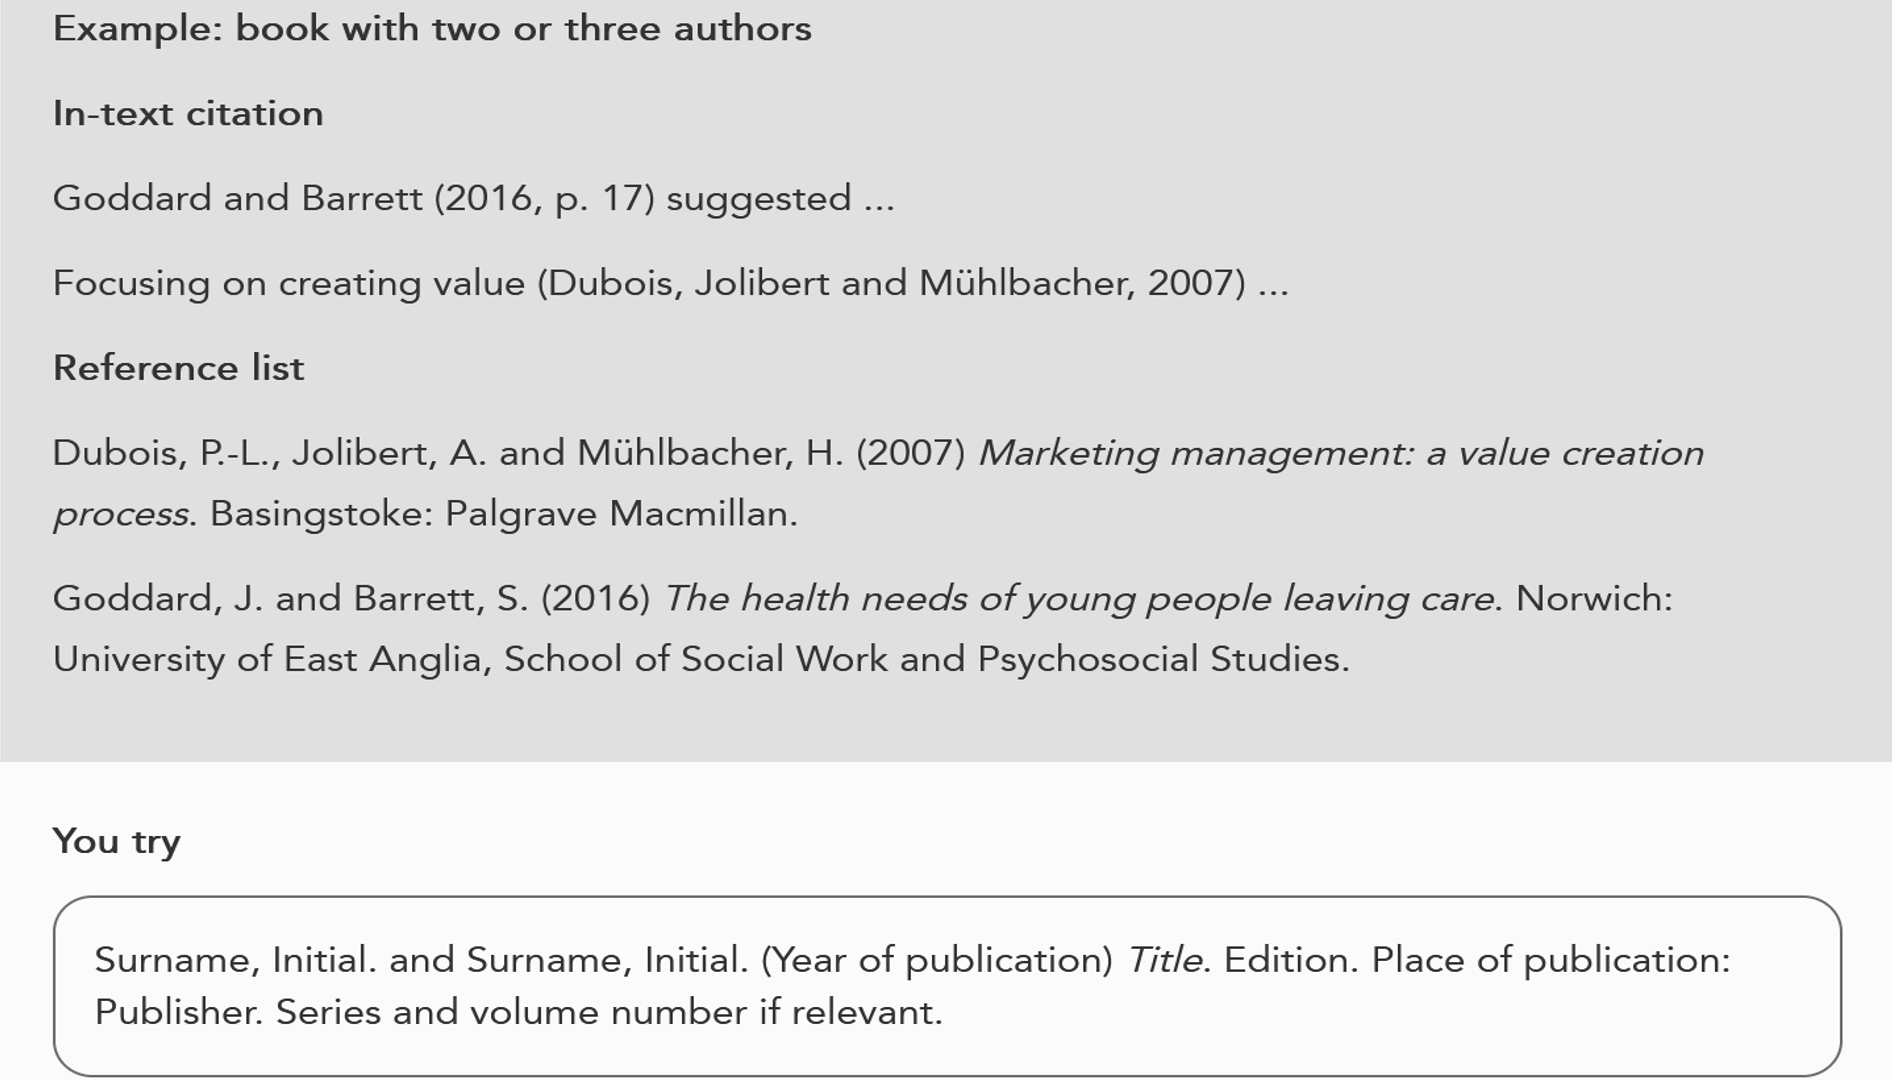 Screenshot for referencing a book with two or three authors